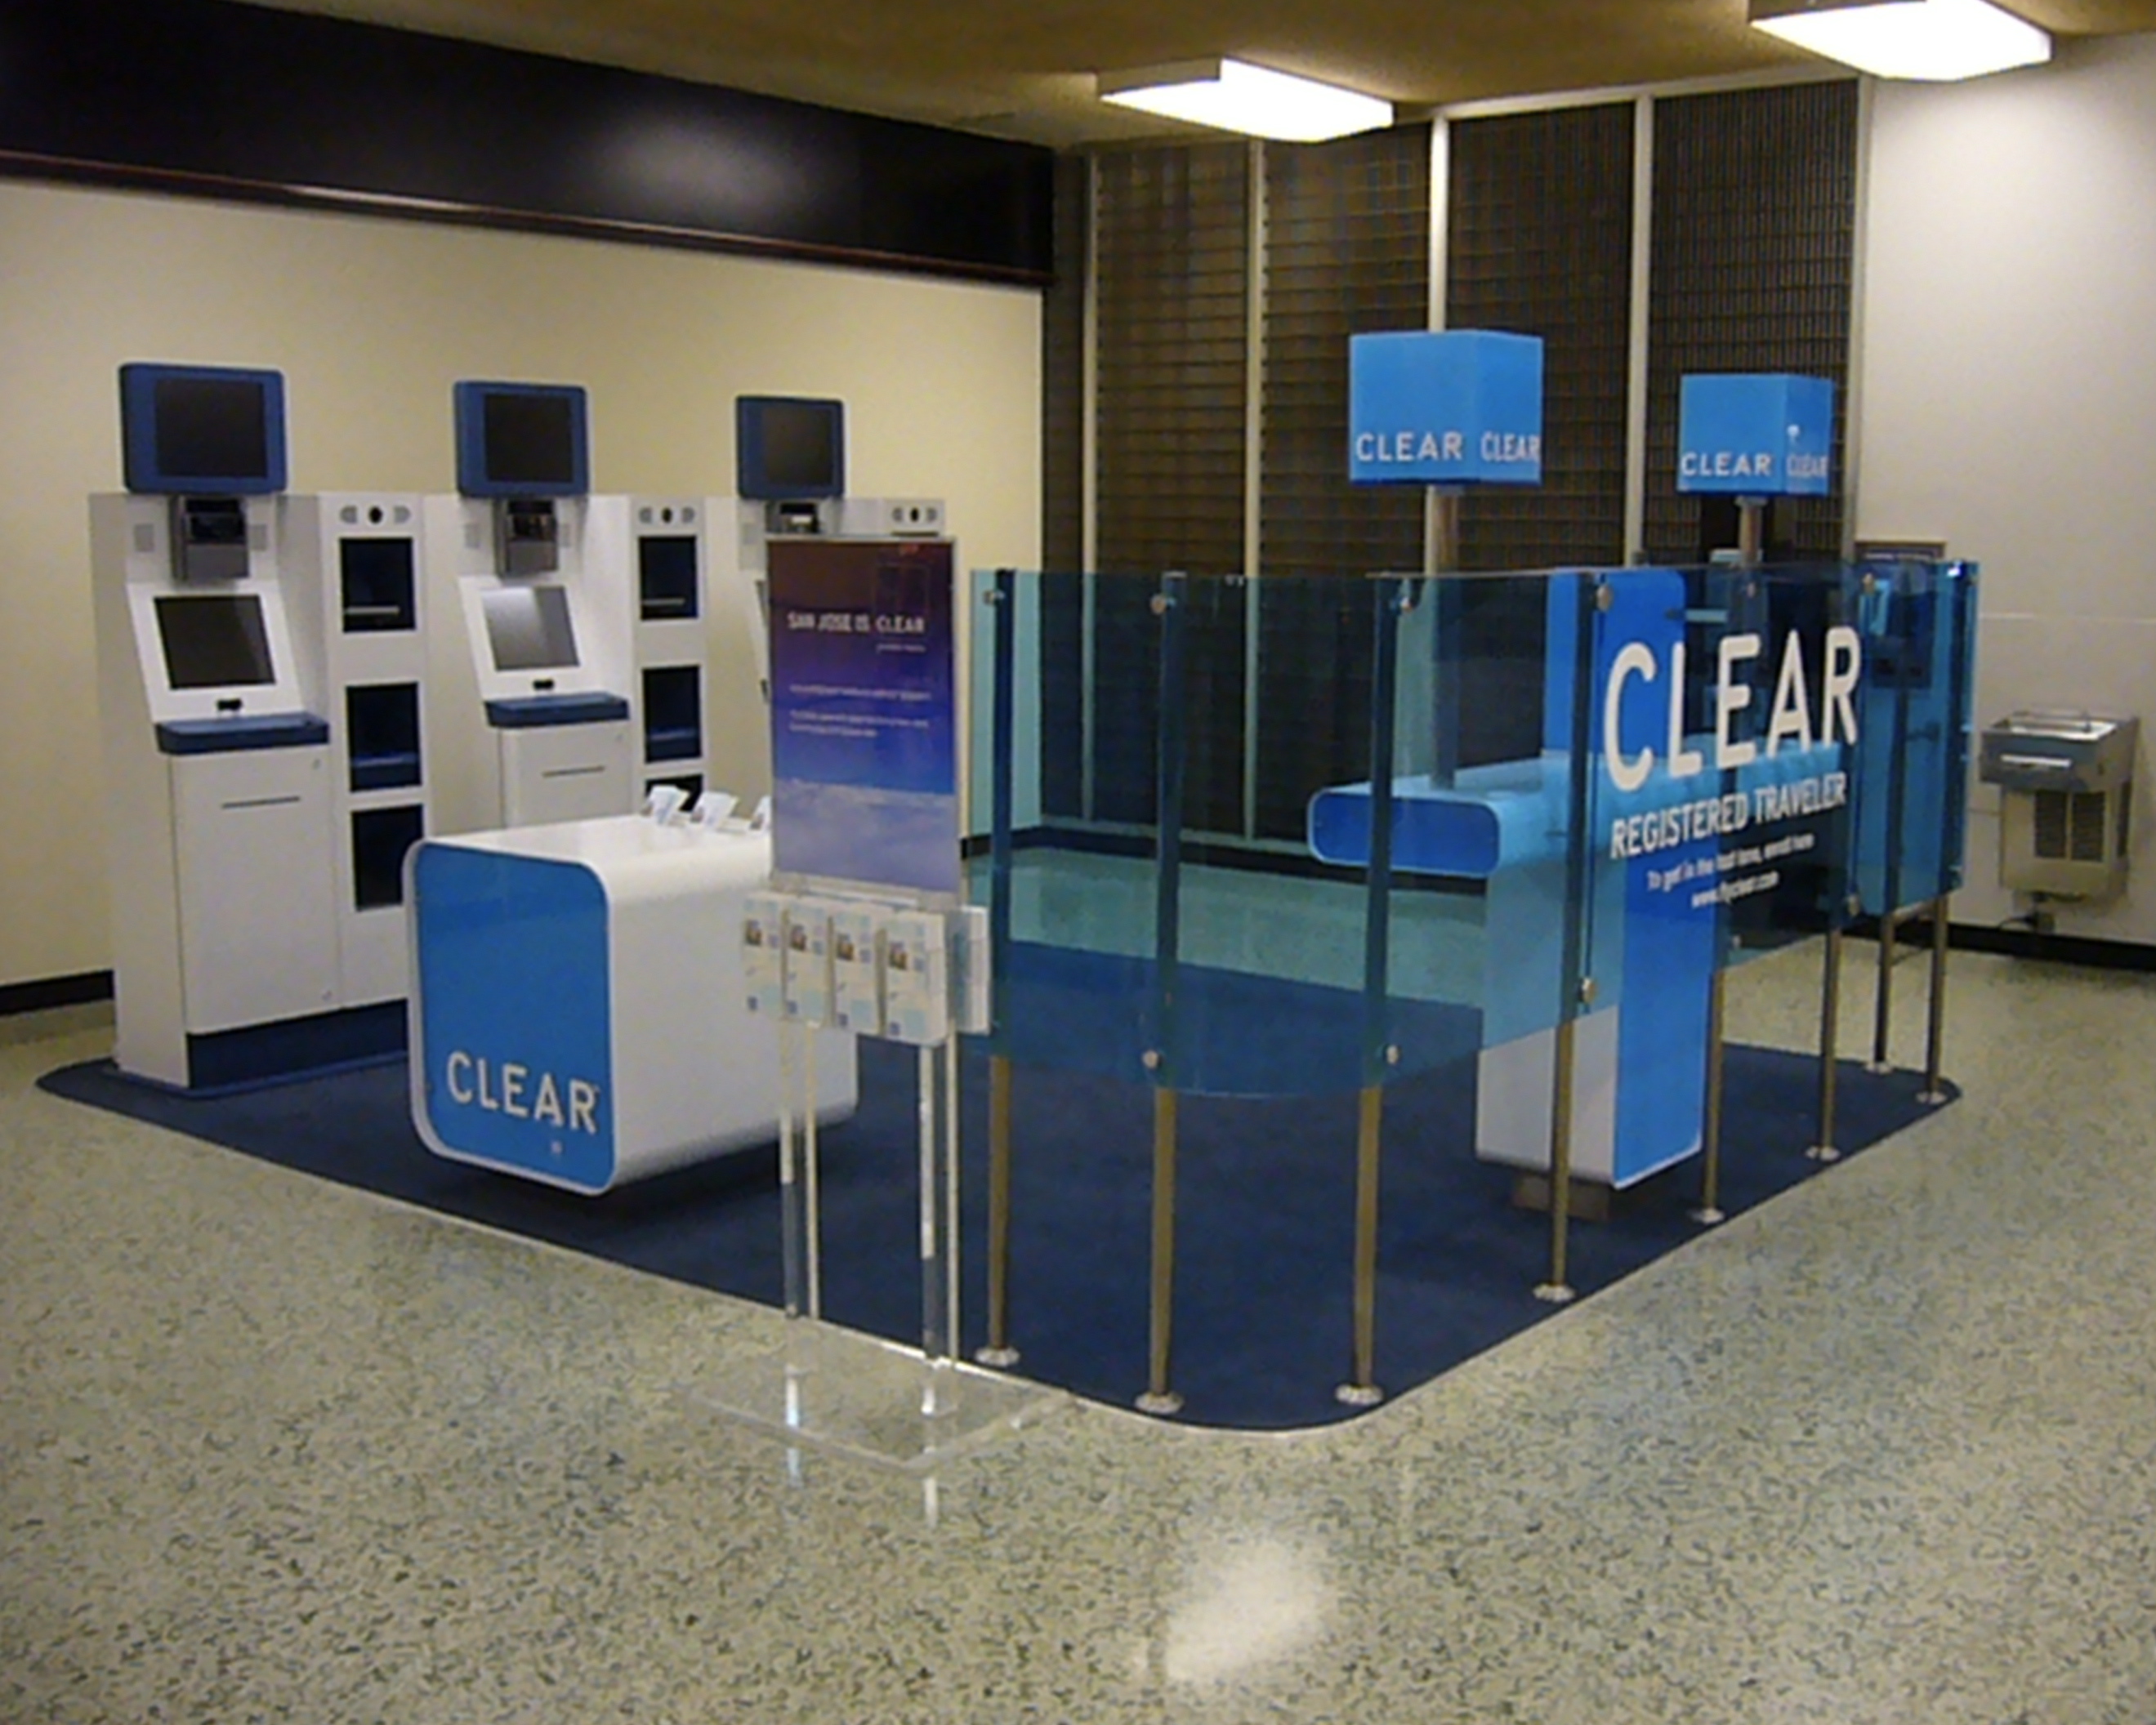 Fly Clear Station